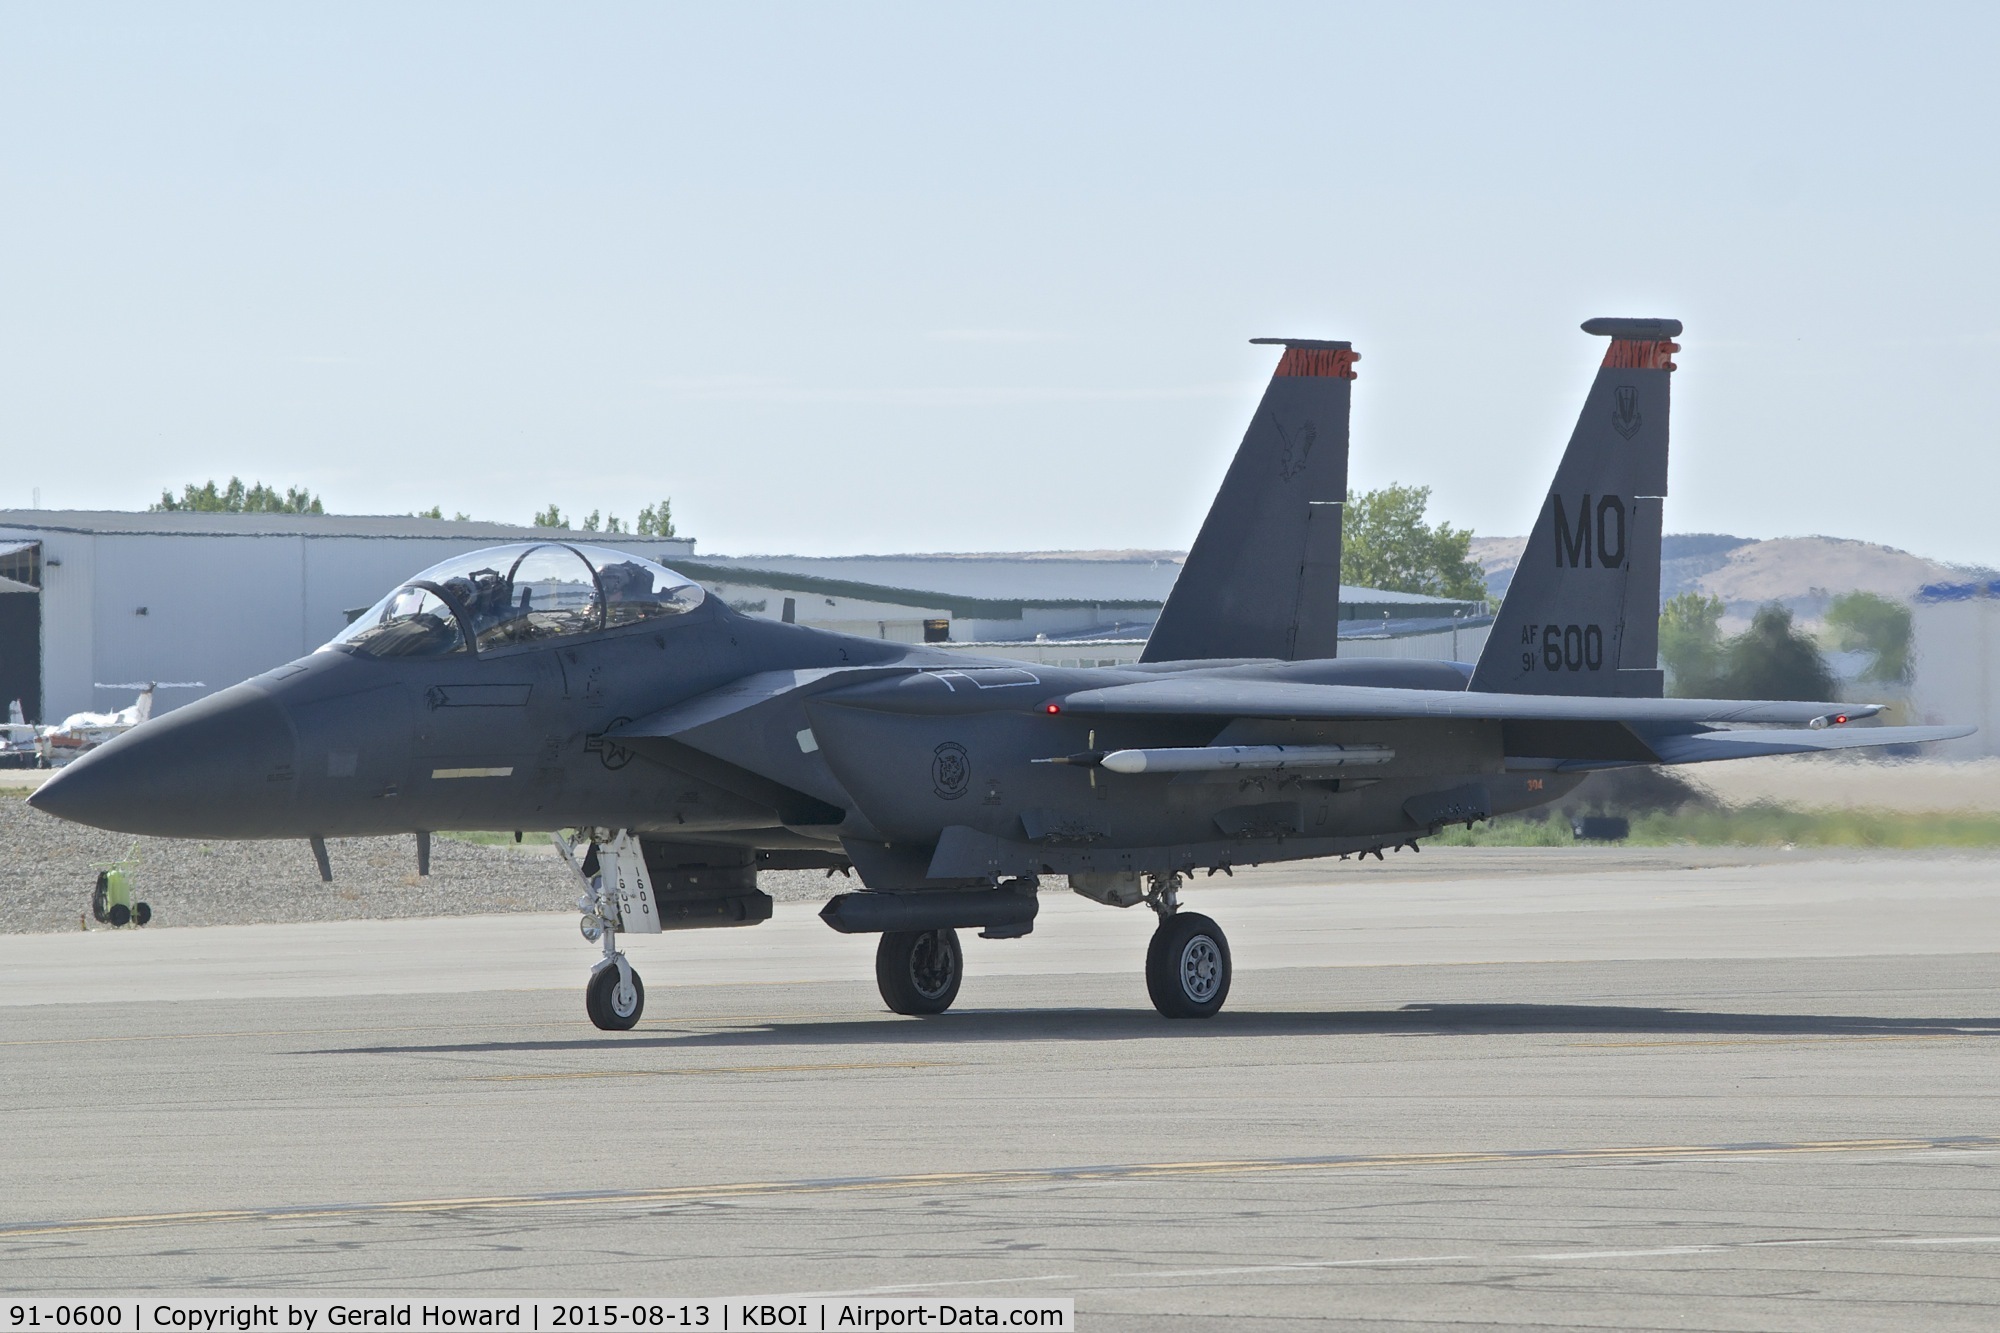 91-0600, 1991 McDonnell Douglas F-15E Strike Eagle C/N 1243/E201, Taxiing to RWY 10R. 391st Fighter Sq. 